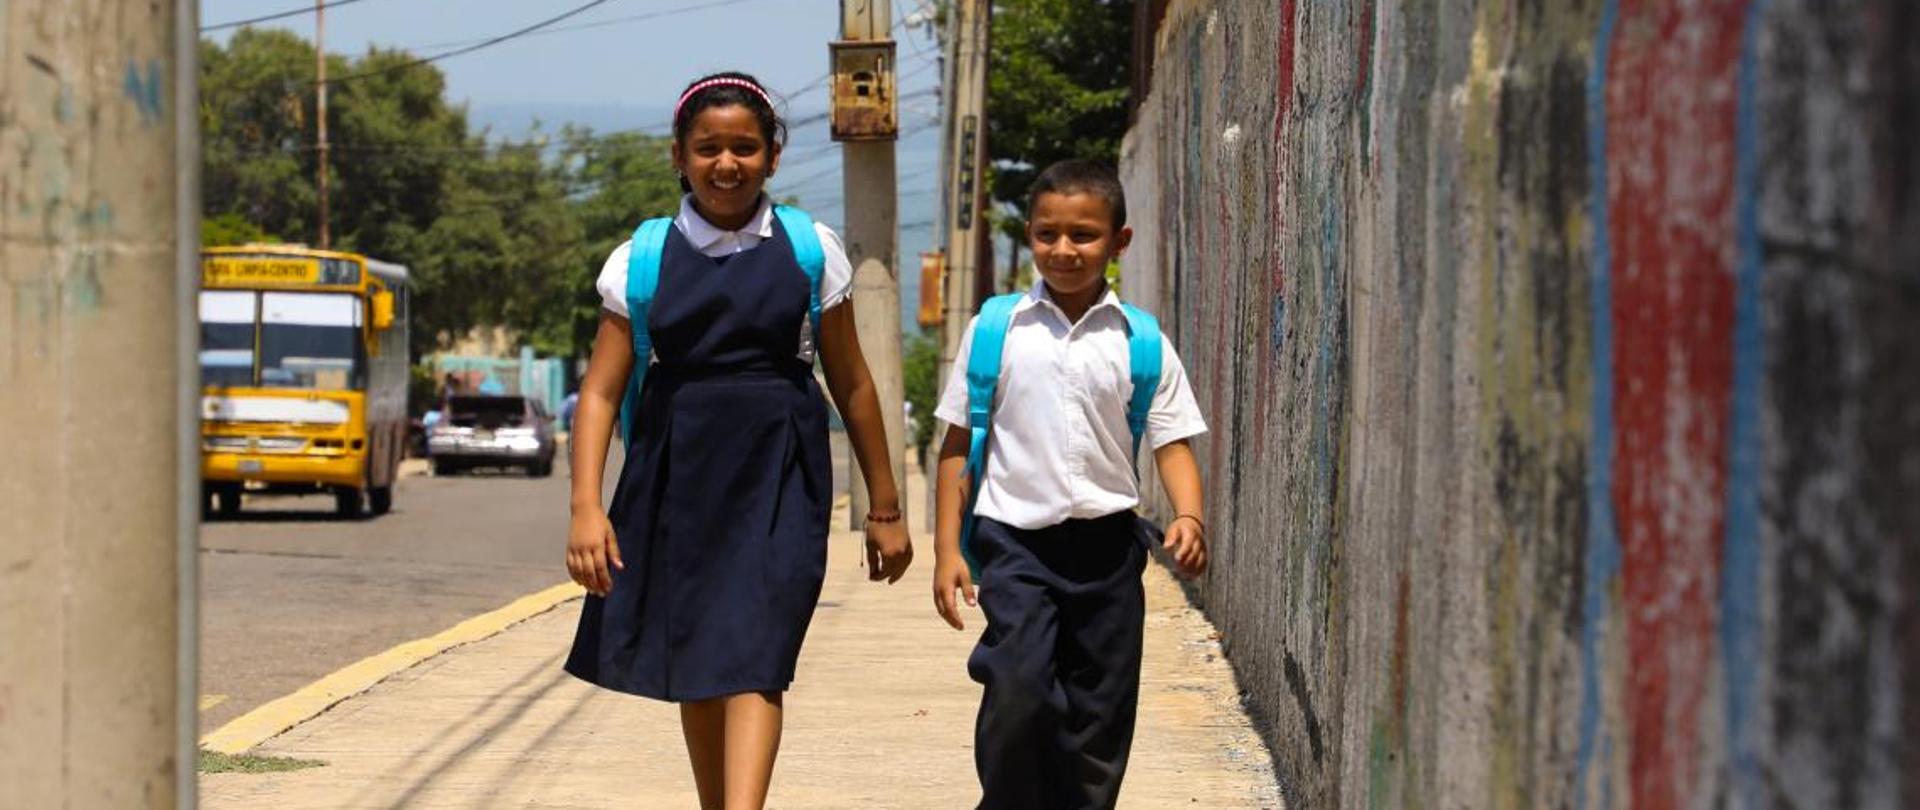 Valeria and Manuel on their way to school, 